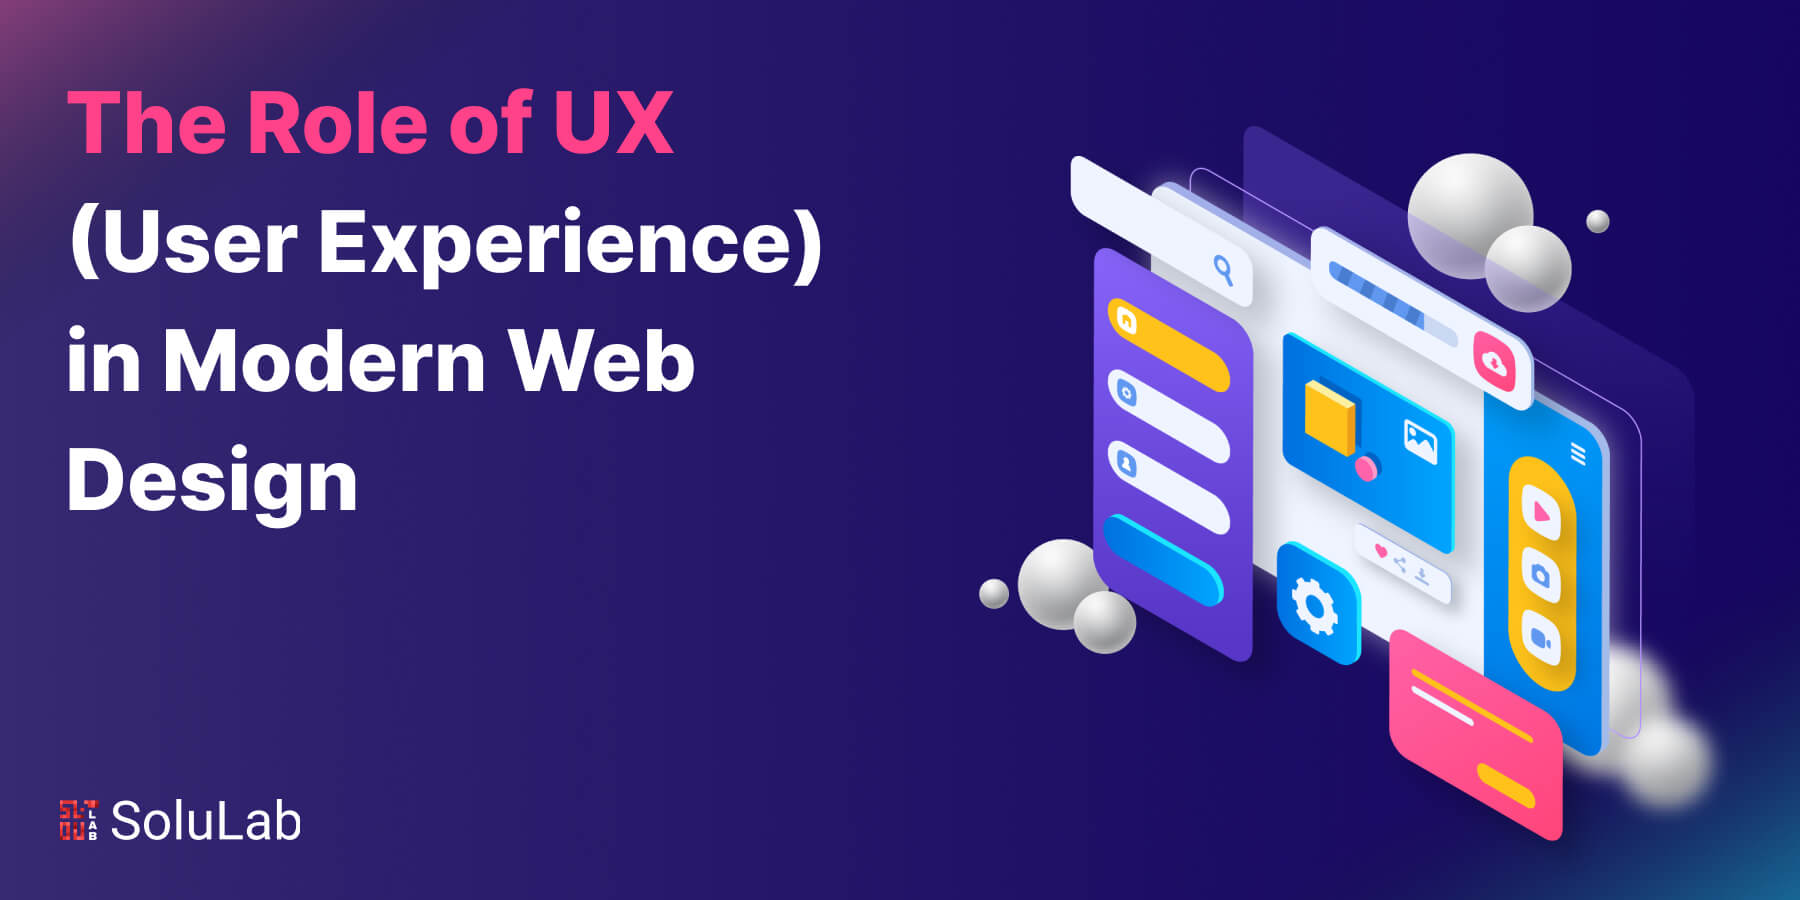 The Role of UX (User Experience) in Modern Web Design